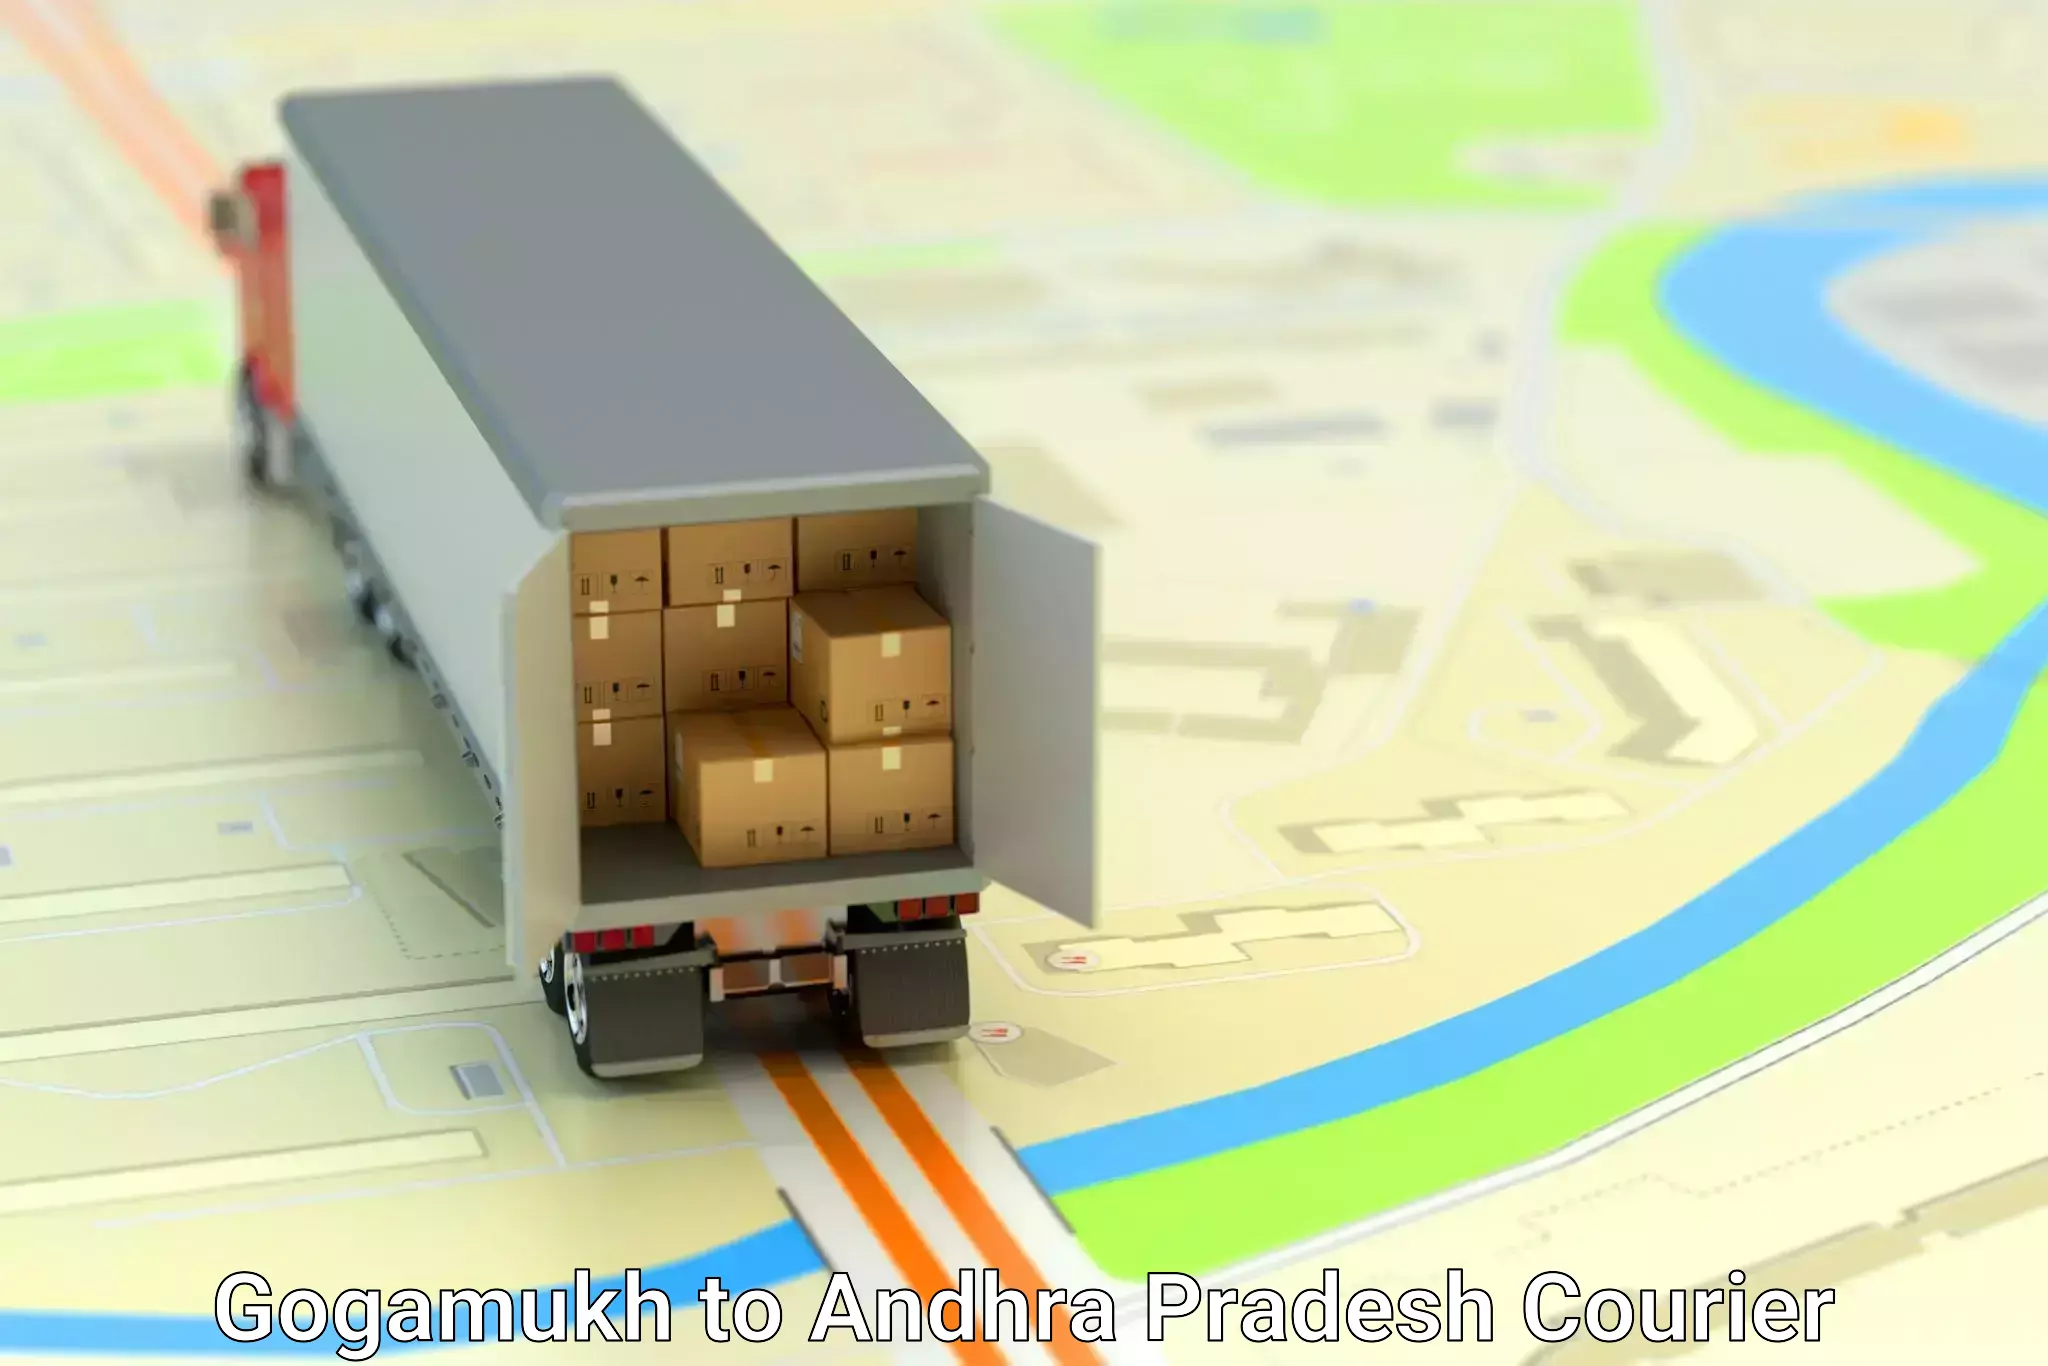 Package delivery network Gogamukh to IIT Tirupati